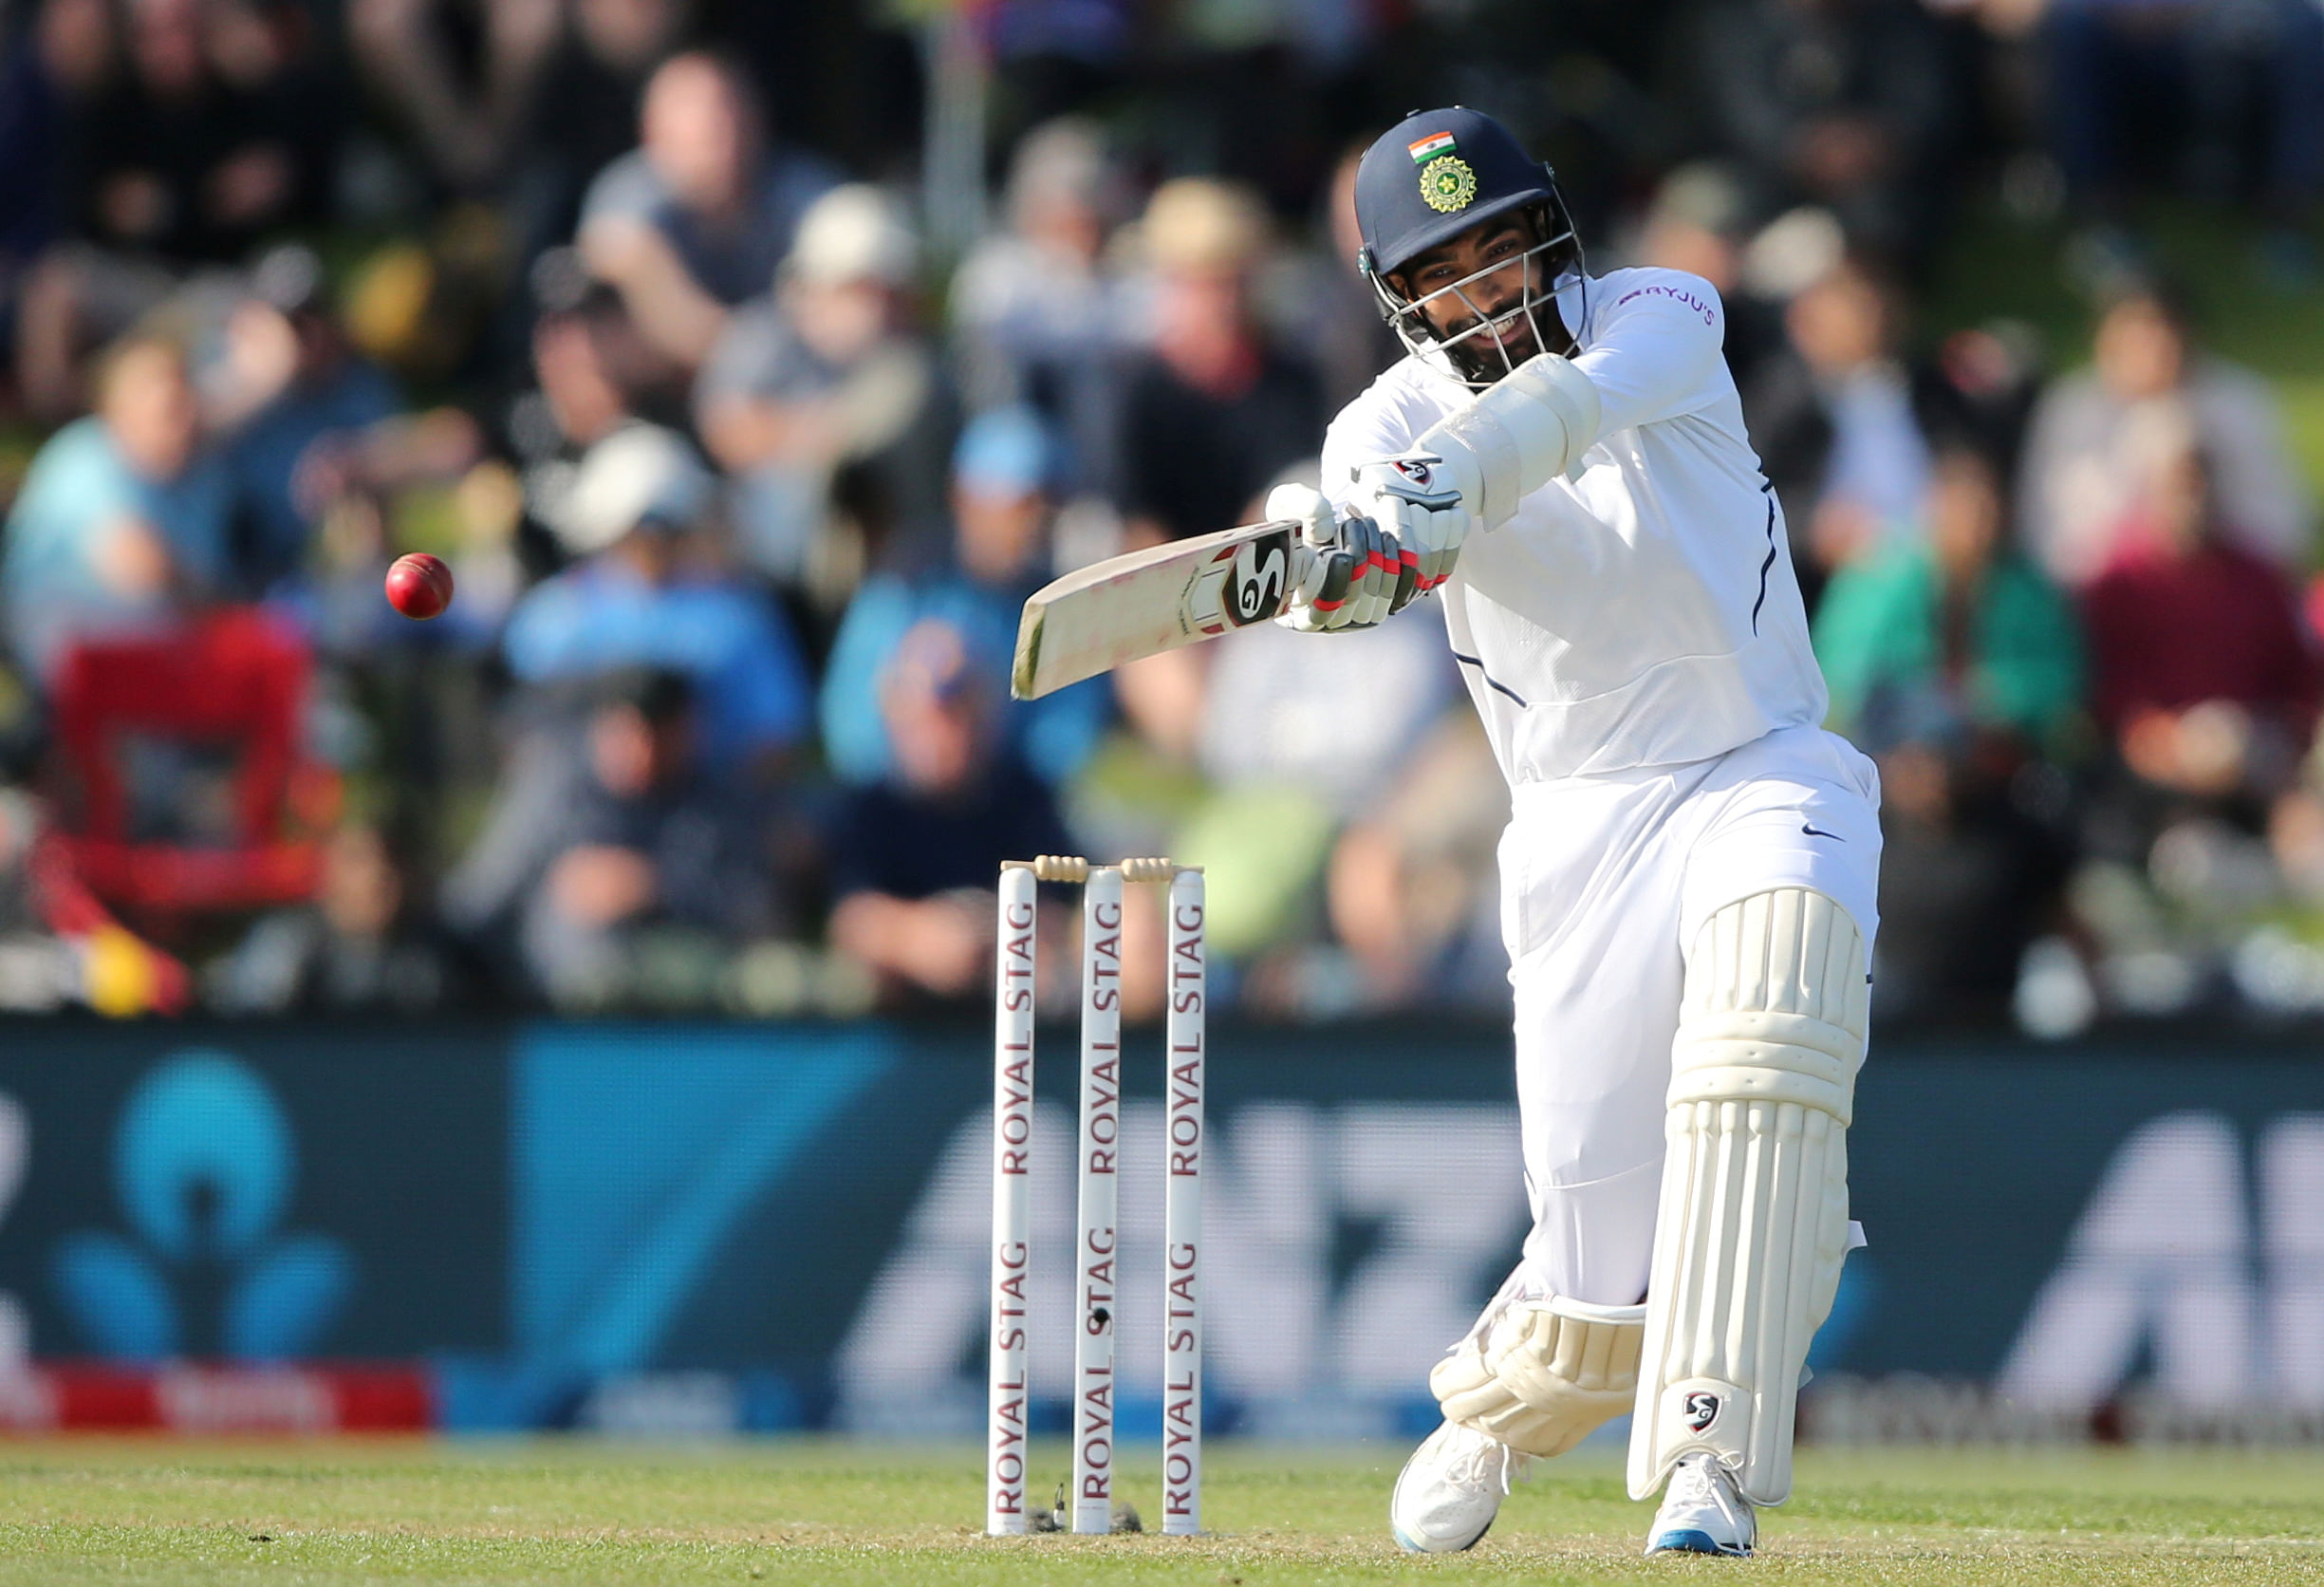 Bumrah said he has faith in Rishabh Pant and Hanuma Vihari's ability to push the opposition hard on the third day even though it will be easier said than done.